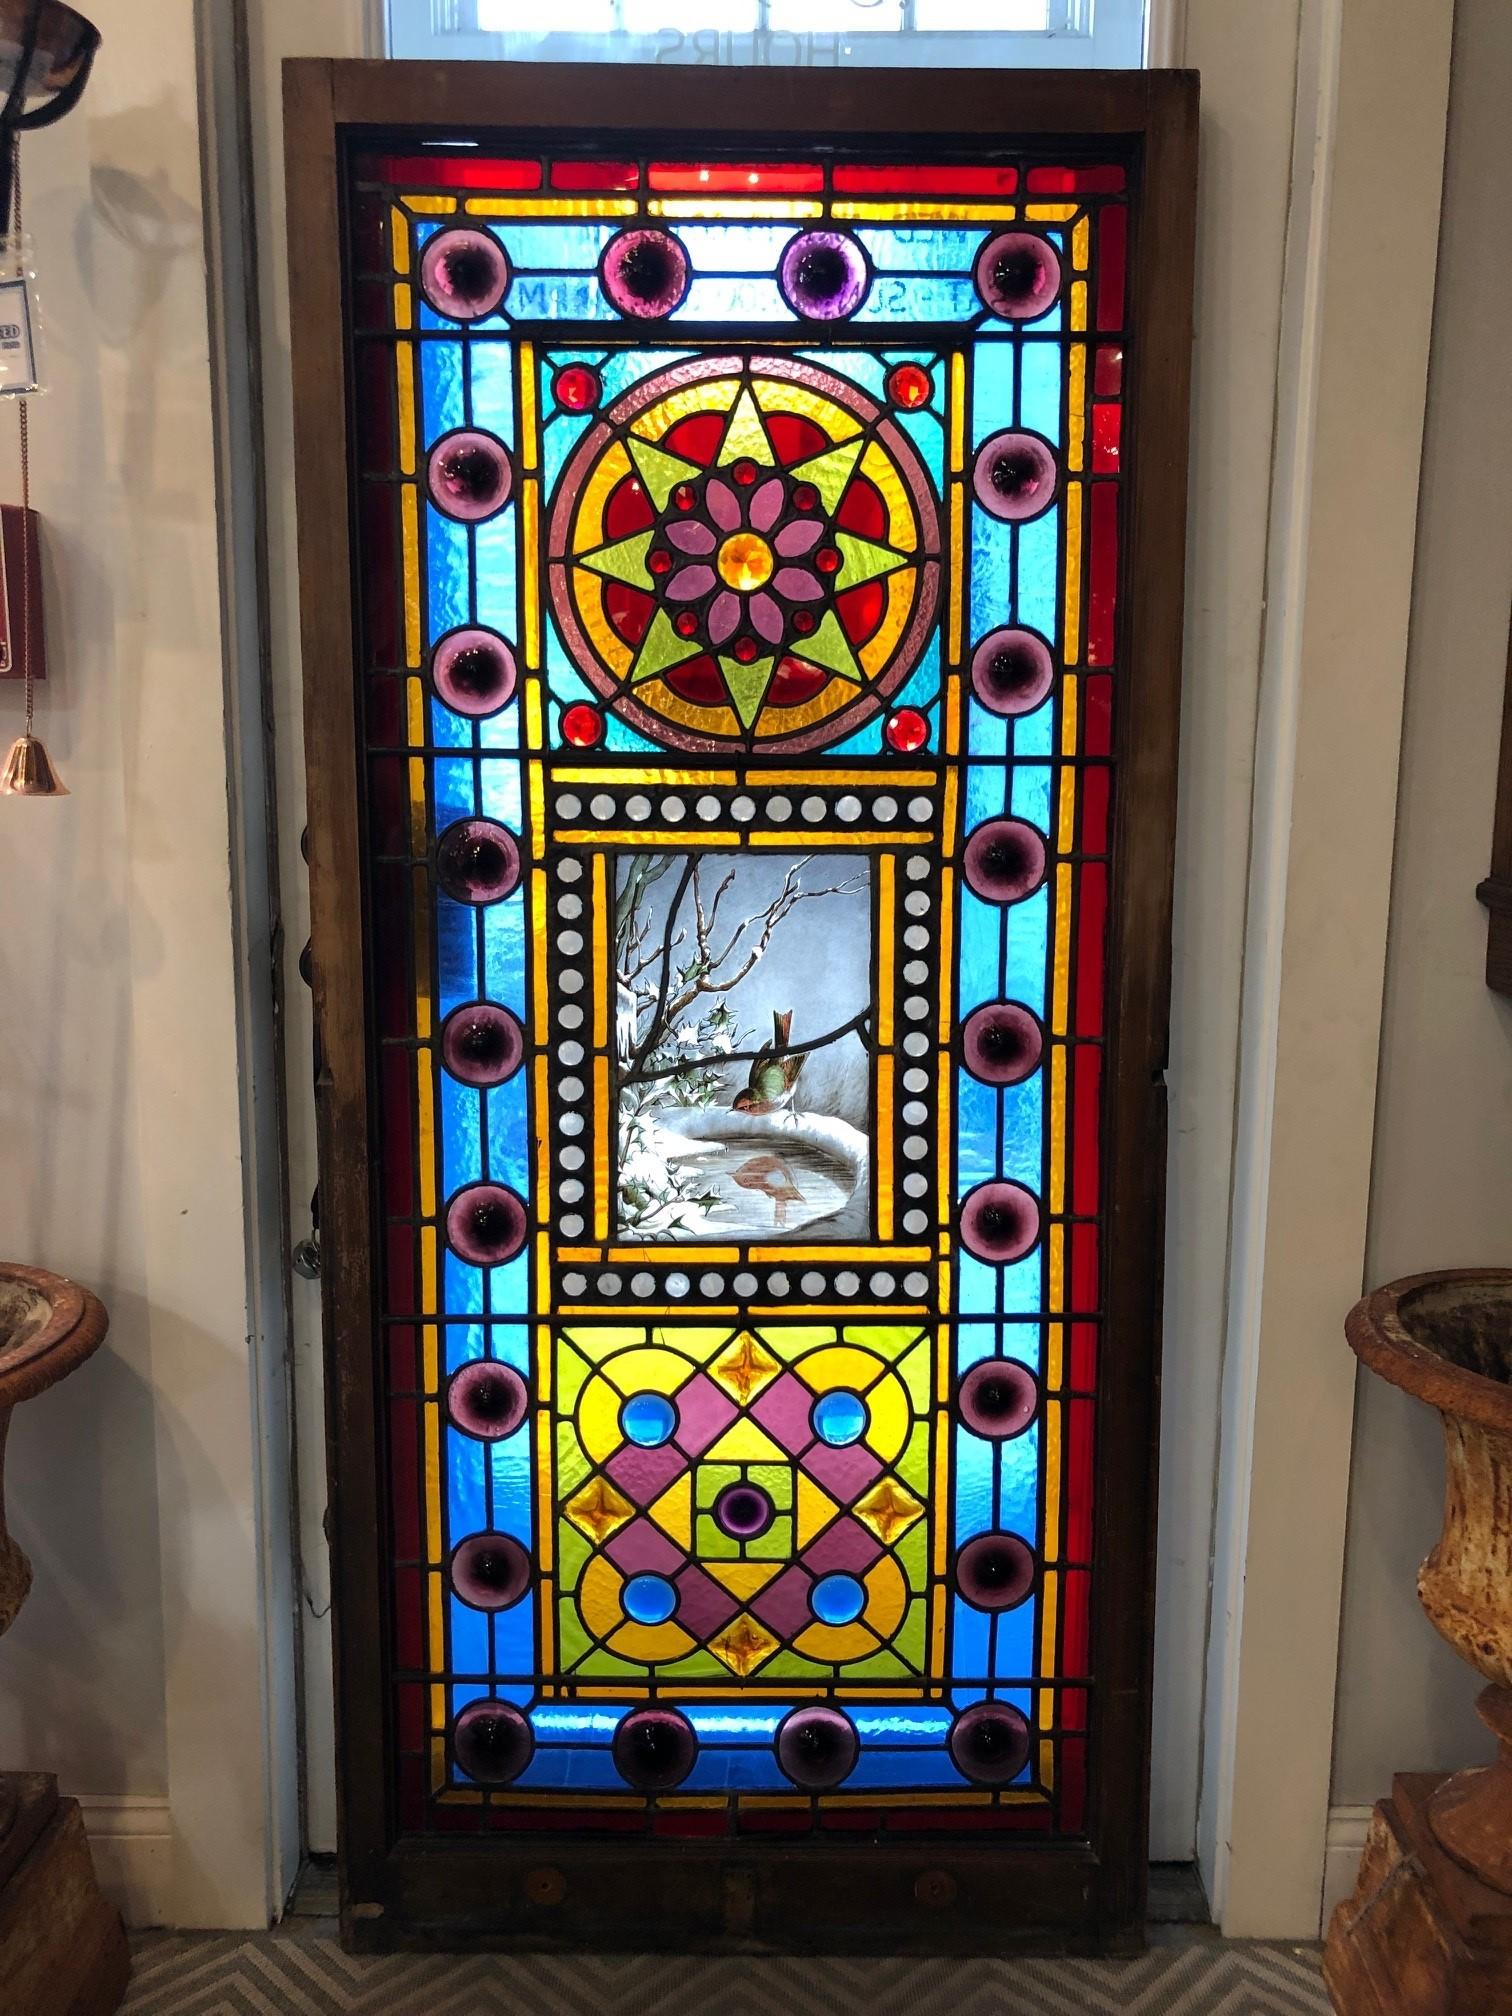 Late 19th century Victorian Stained glass window with a hand painted center panel of a small bird seeing its reflection in a frozen birdbath, the detail is simply amazing. The brilliant colors and 65 multi faceted jewels with 22 rondels around the